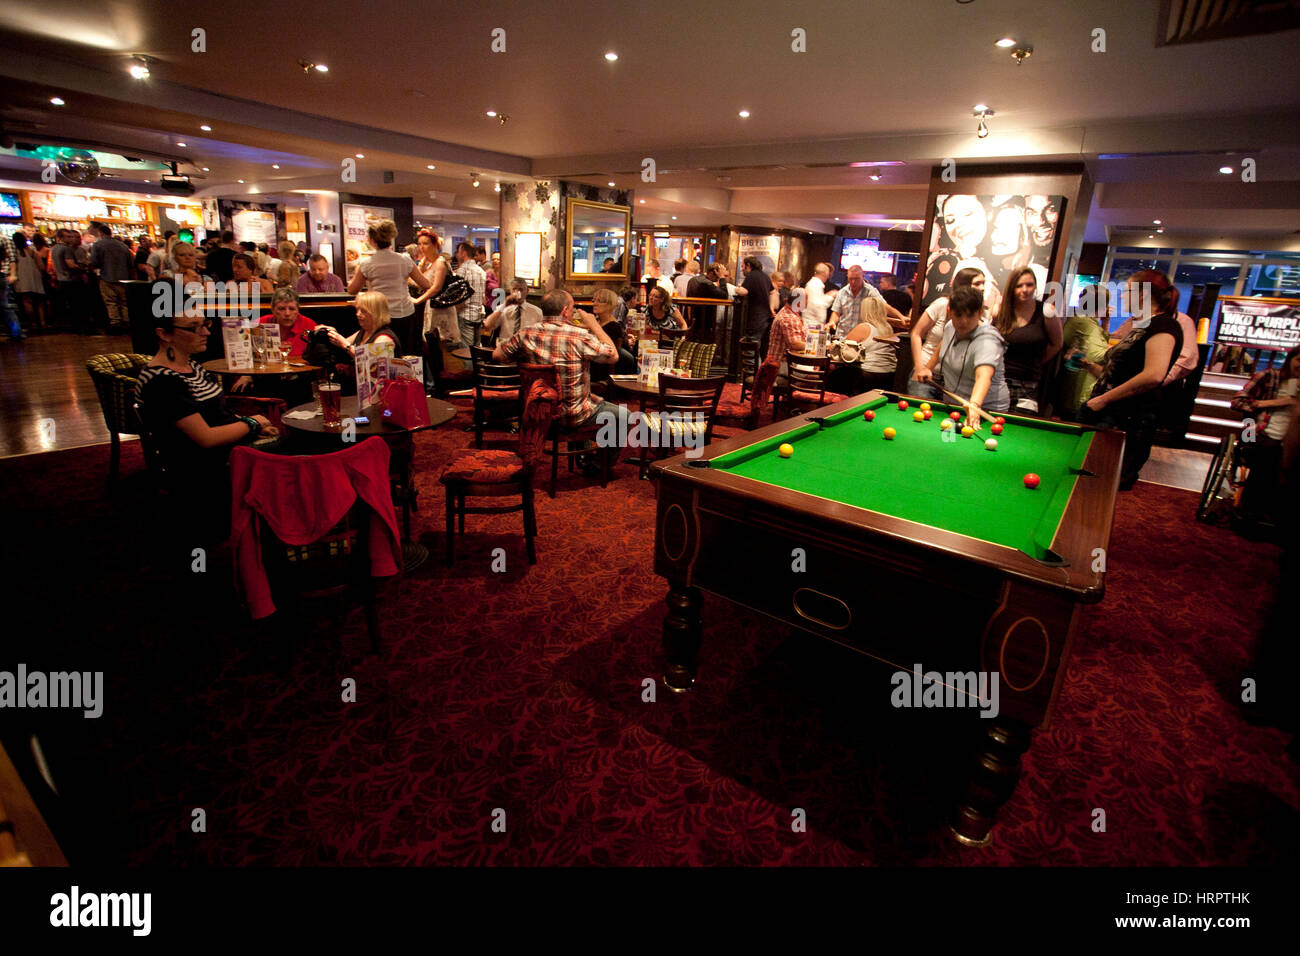 Interior of a UK Yate's pub with pool table Stock Photo